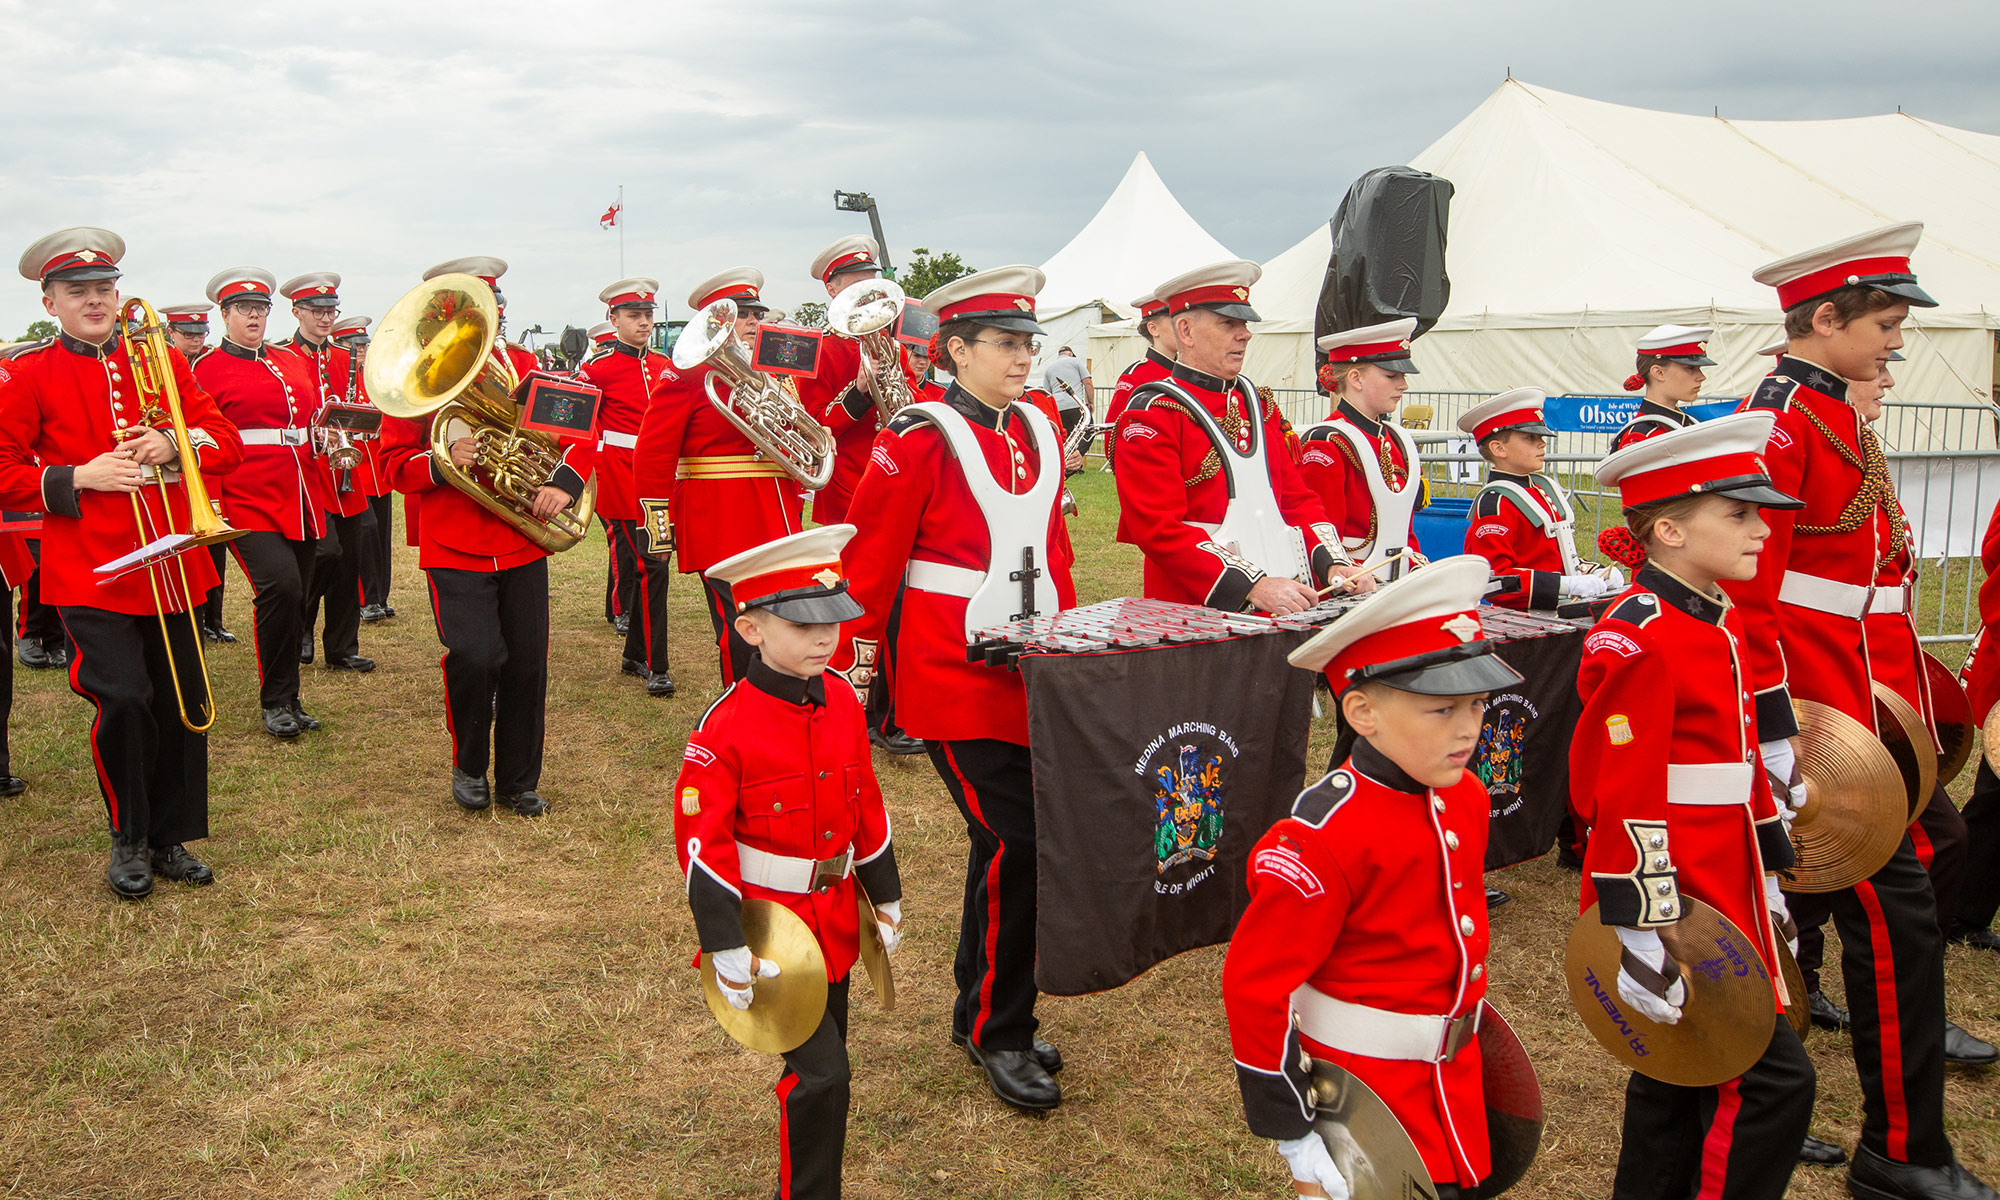 marching band dressed in red uniform